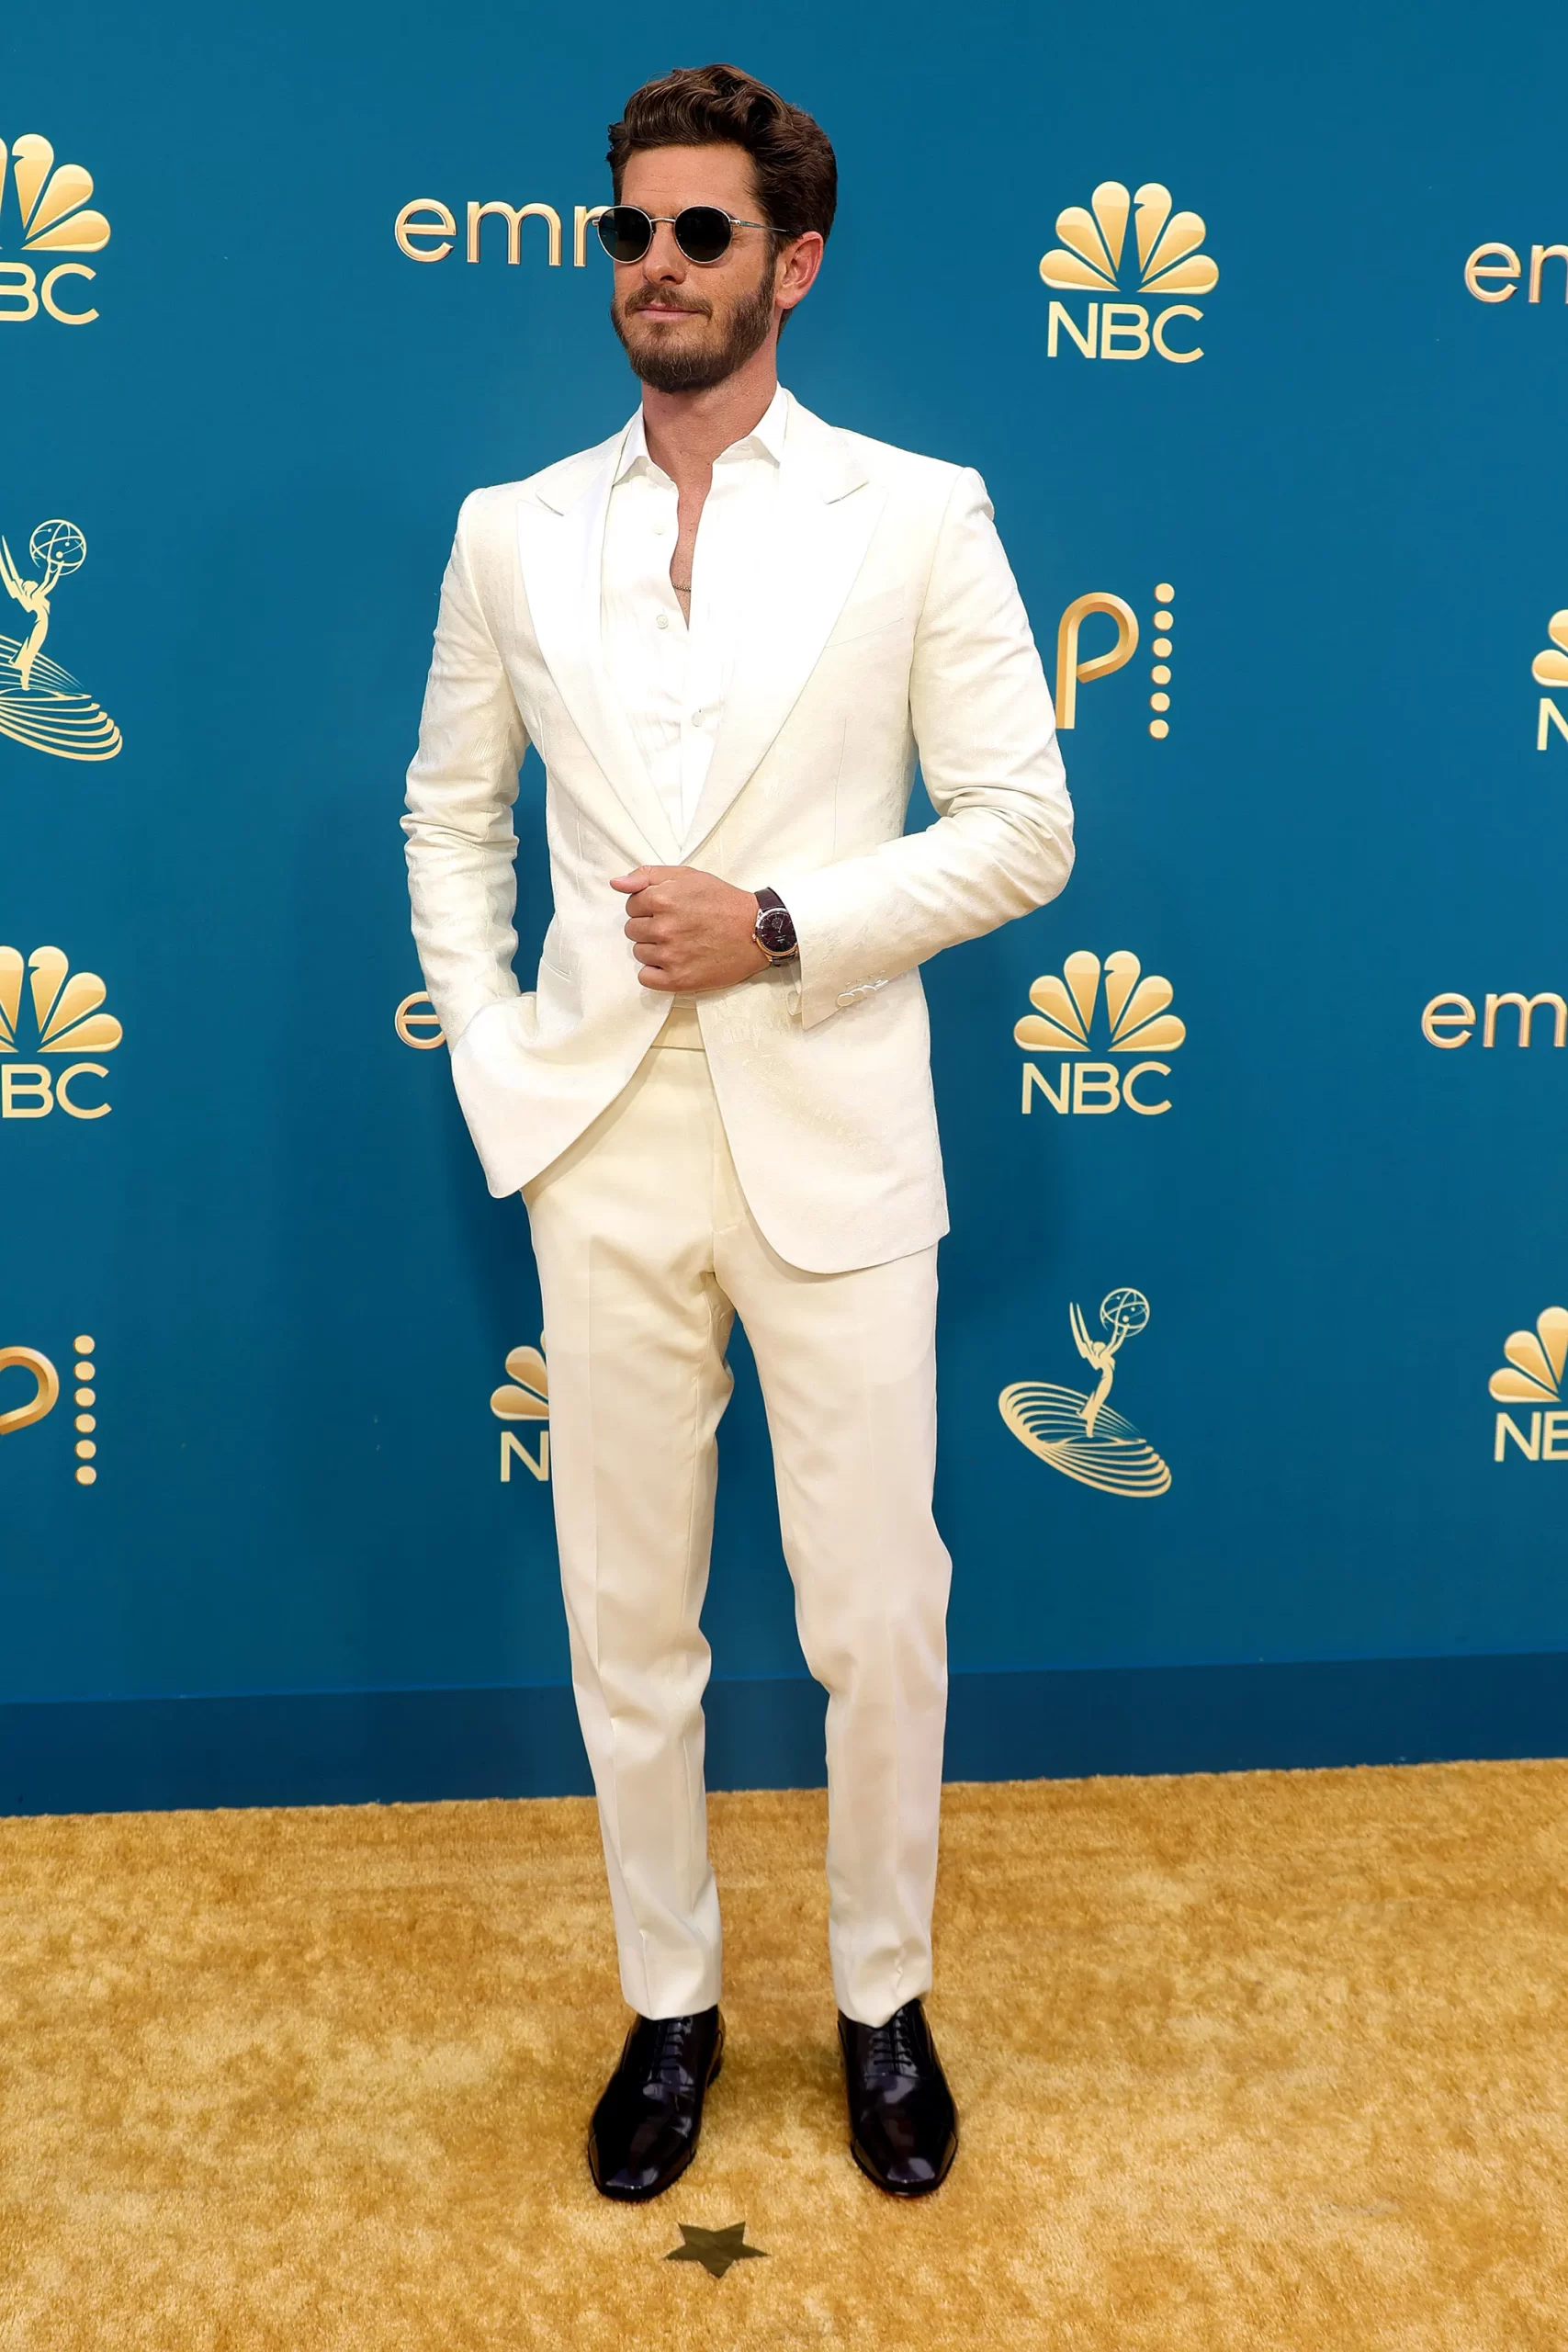 Andrew-Garfield-Emmys-2022-GettyImages-1423216800.jpg